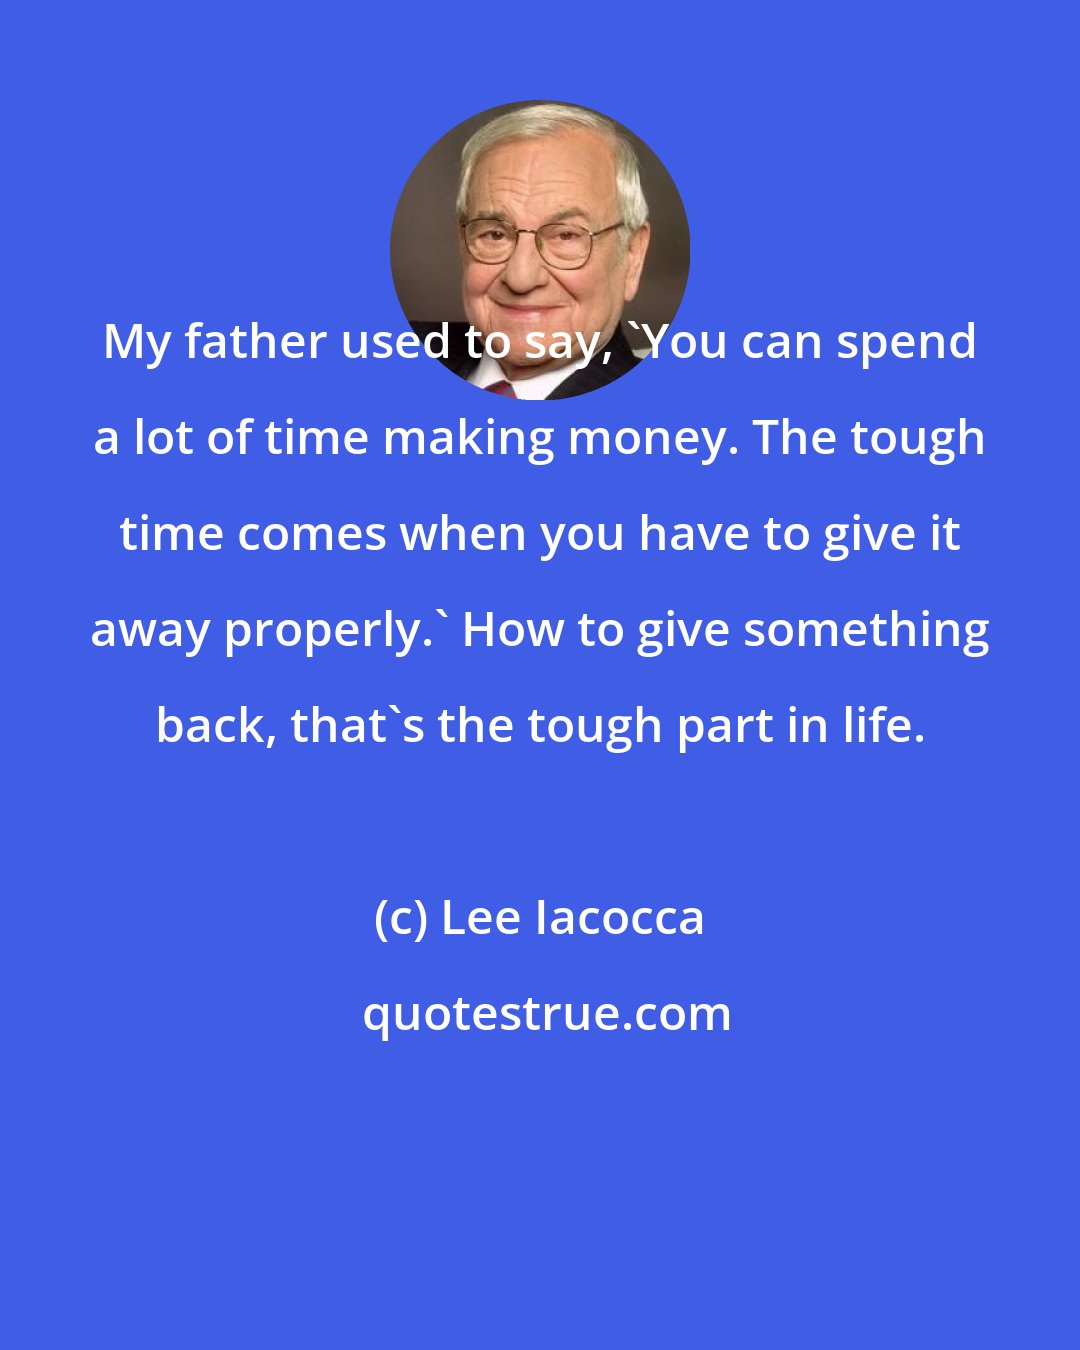 Lee Iacocca: My father used to say, 'You can spend a lot of time making money. The tough time comes when you have to give it away properly.' How to give something back, that's the tough part in life.